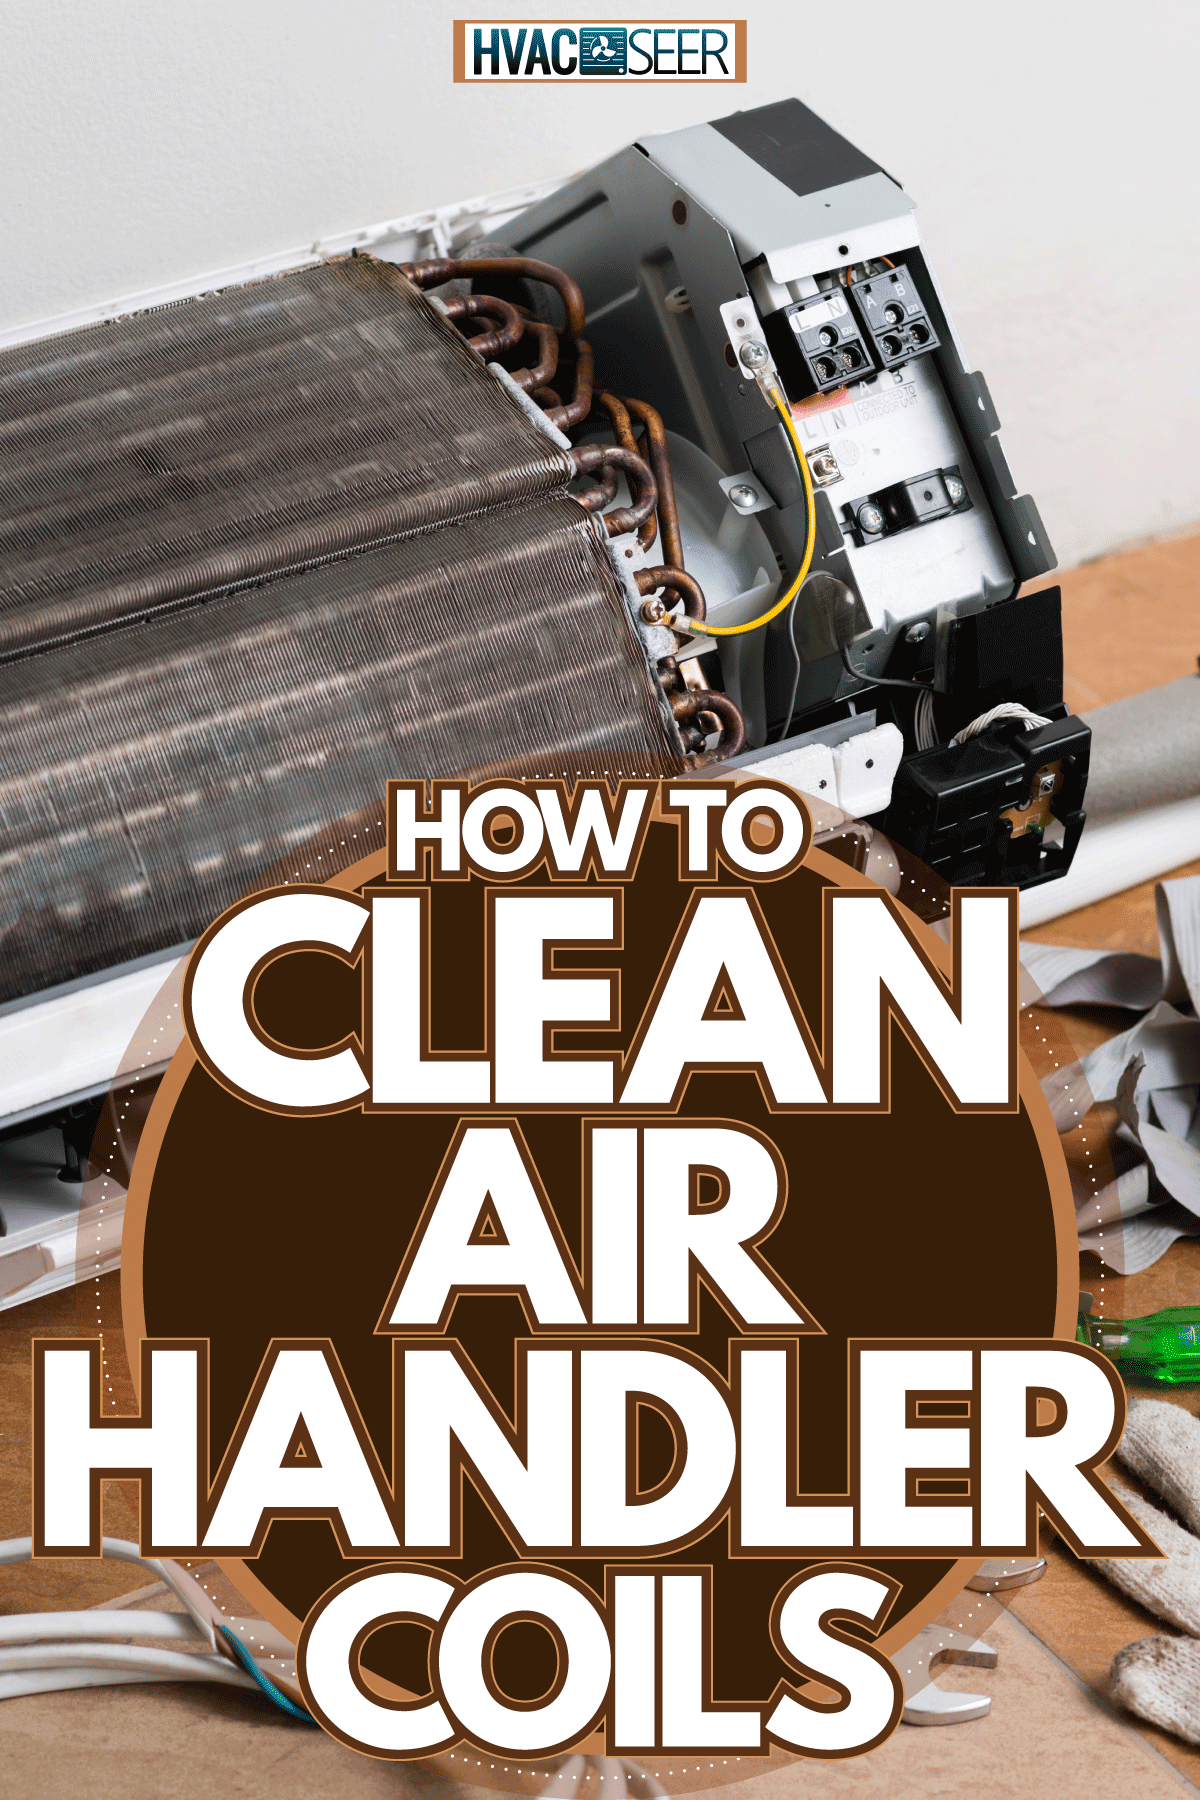 Dissembling an air conditioning unit, How To Clean Air Handler Coils